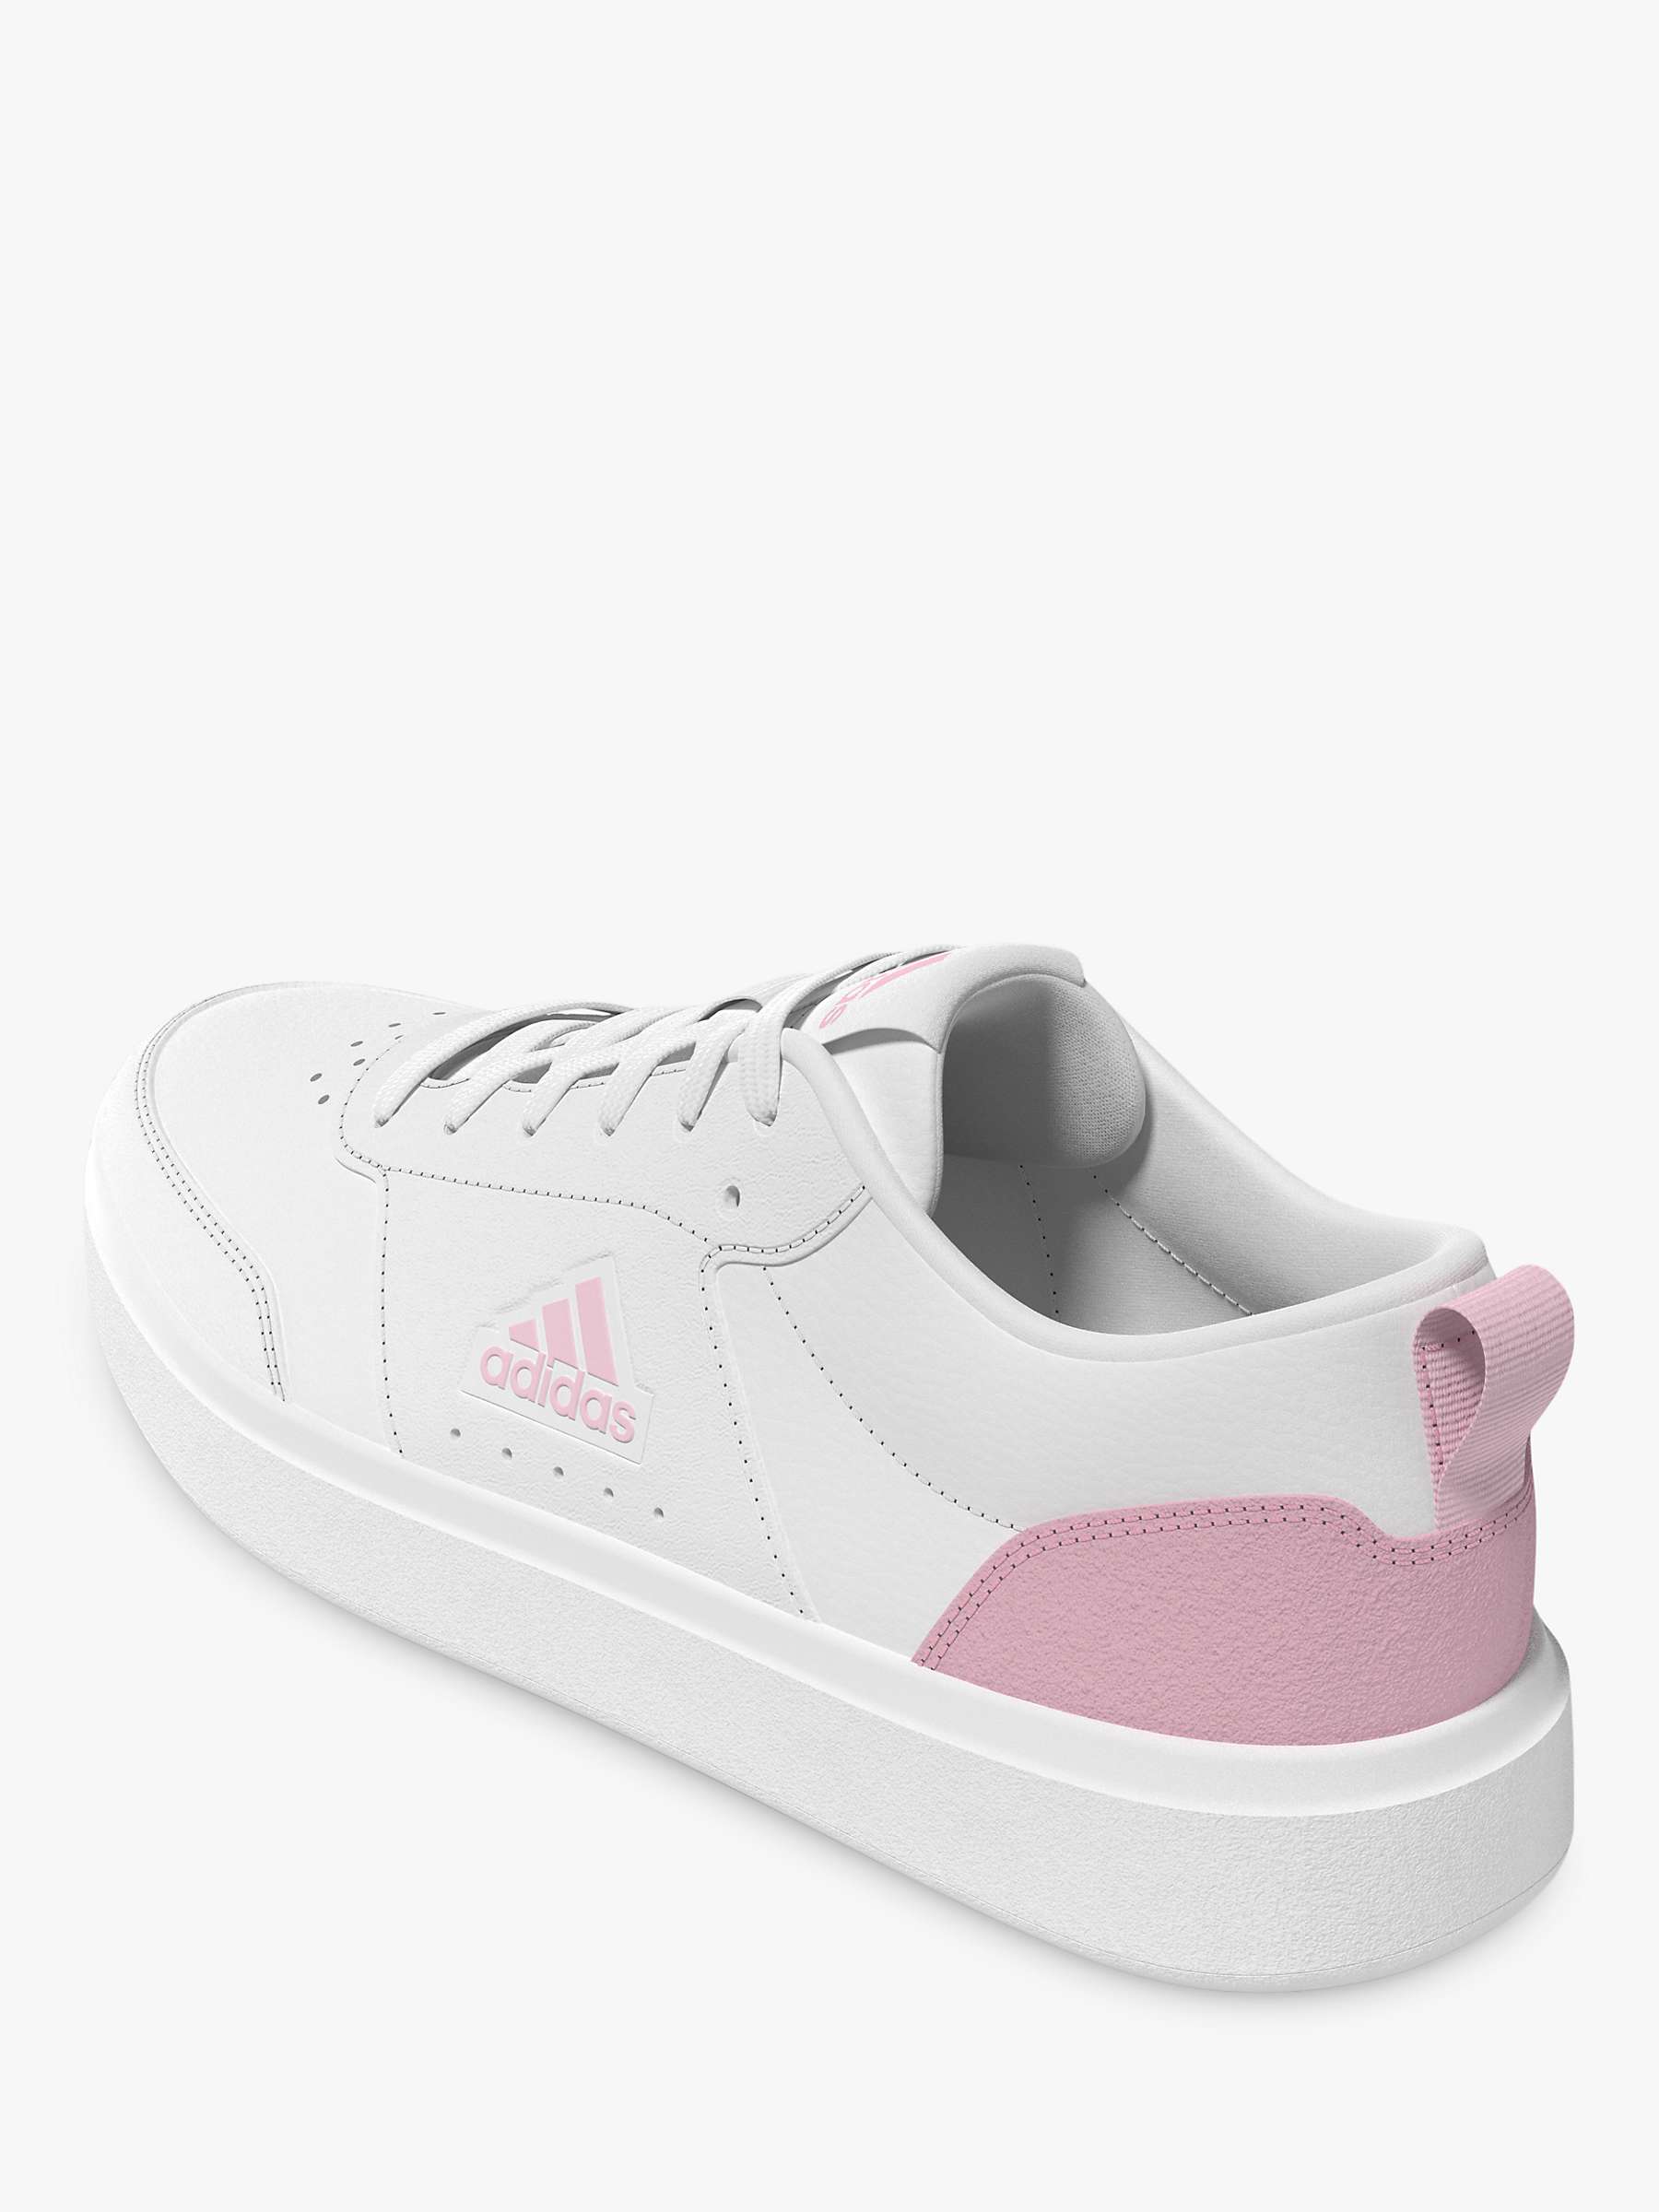 Buy adidas Park Street Lace-Up Trainers, White/Pink Online at johnlewis.com